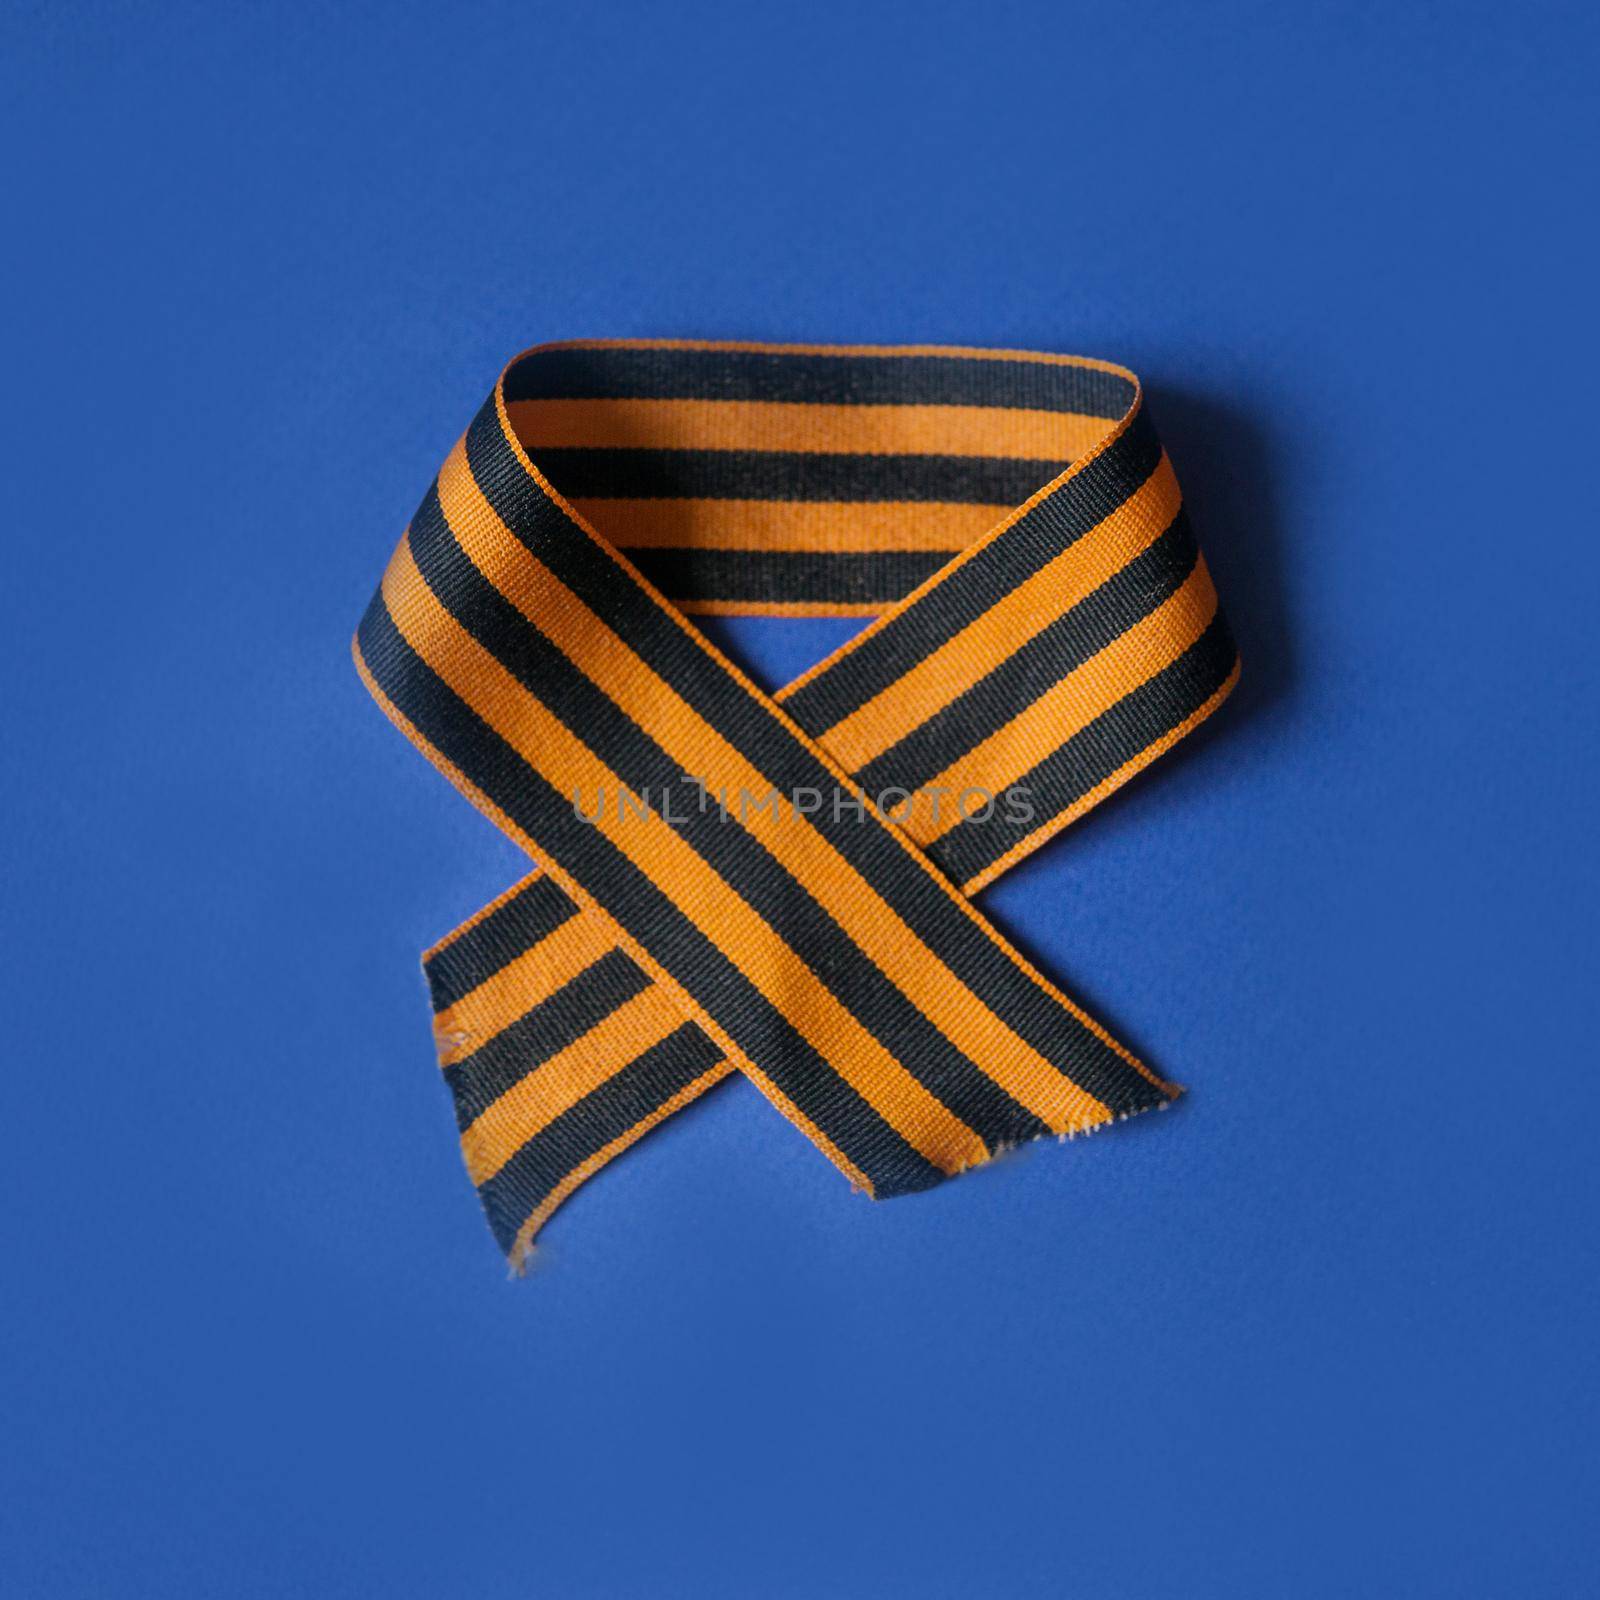 Tver Russia-may 9, 2020: 75 years of Victory in the great Patriotic war. St. George ribbon for 75 years of victory on a blue background. Happy Victory Day by Annu1tochka